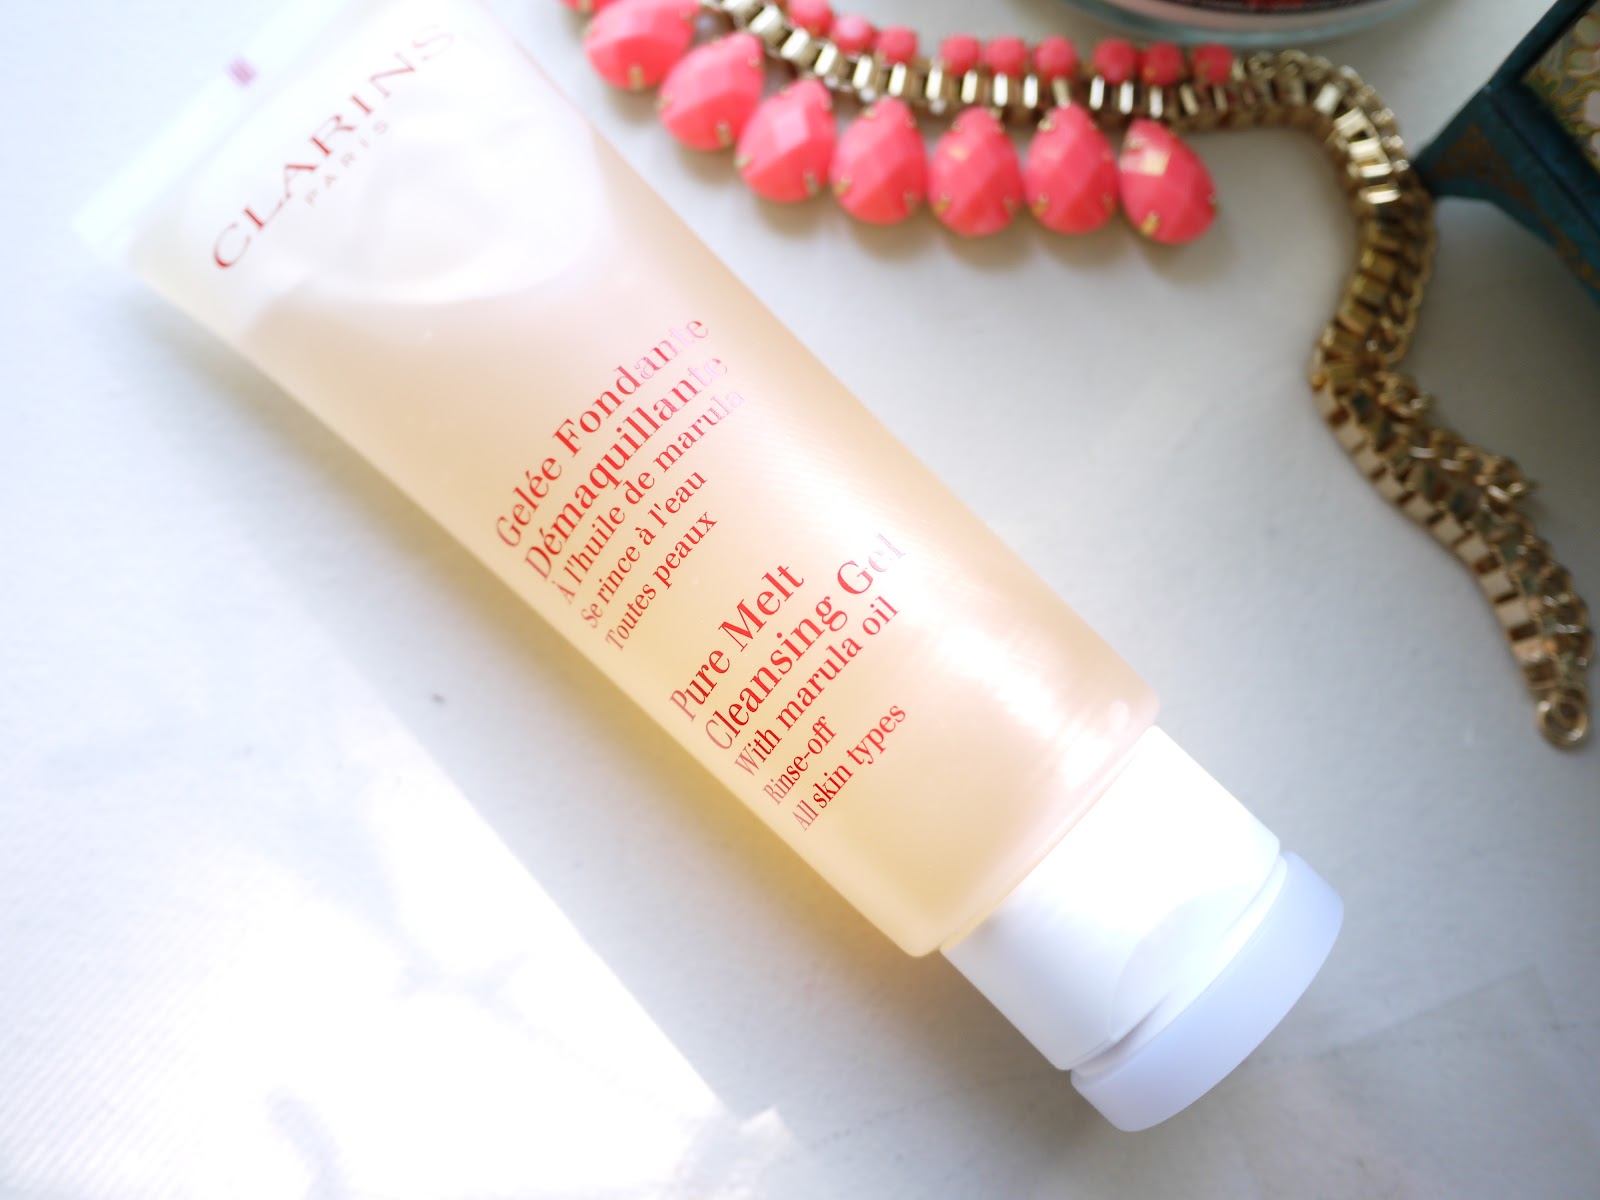 Clarins Pure Melt Cleansing Gel with Marula Oil review